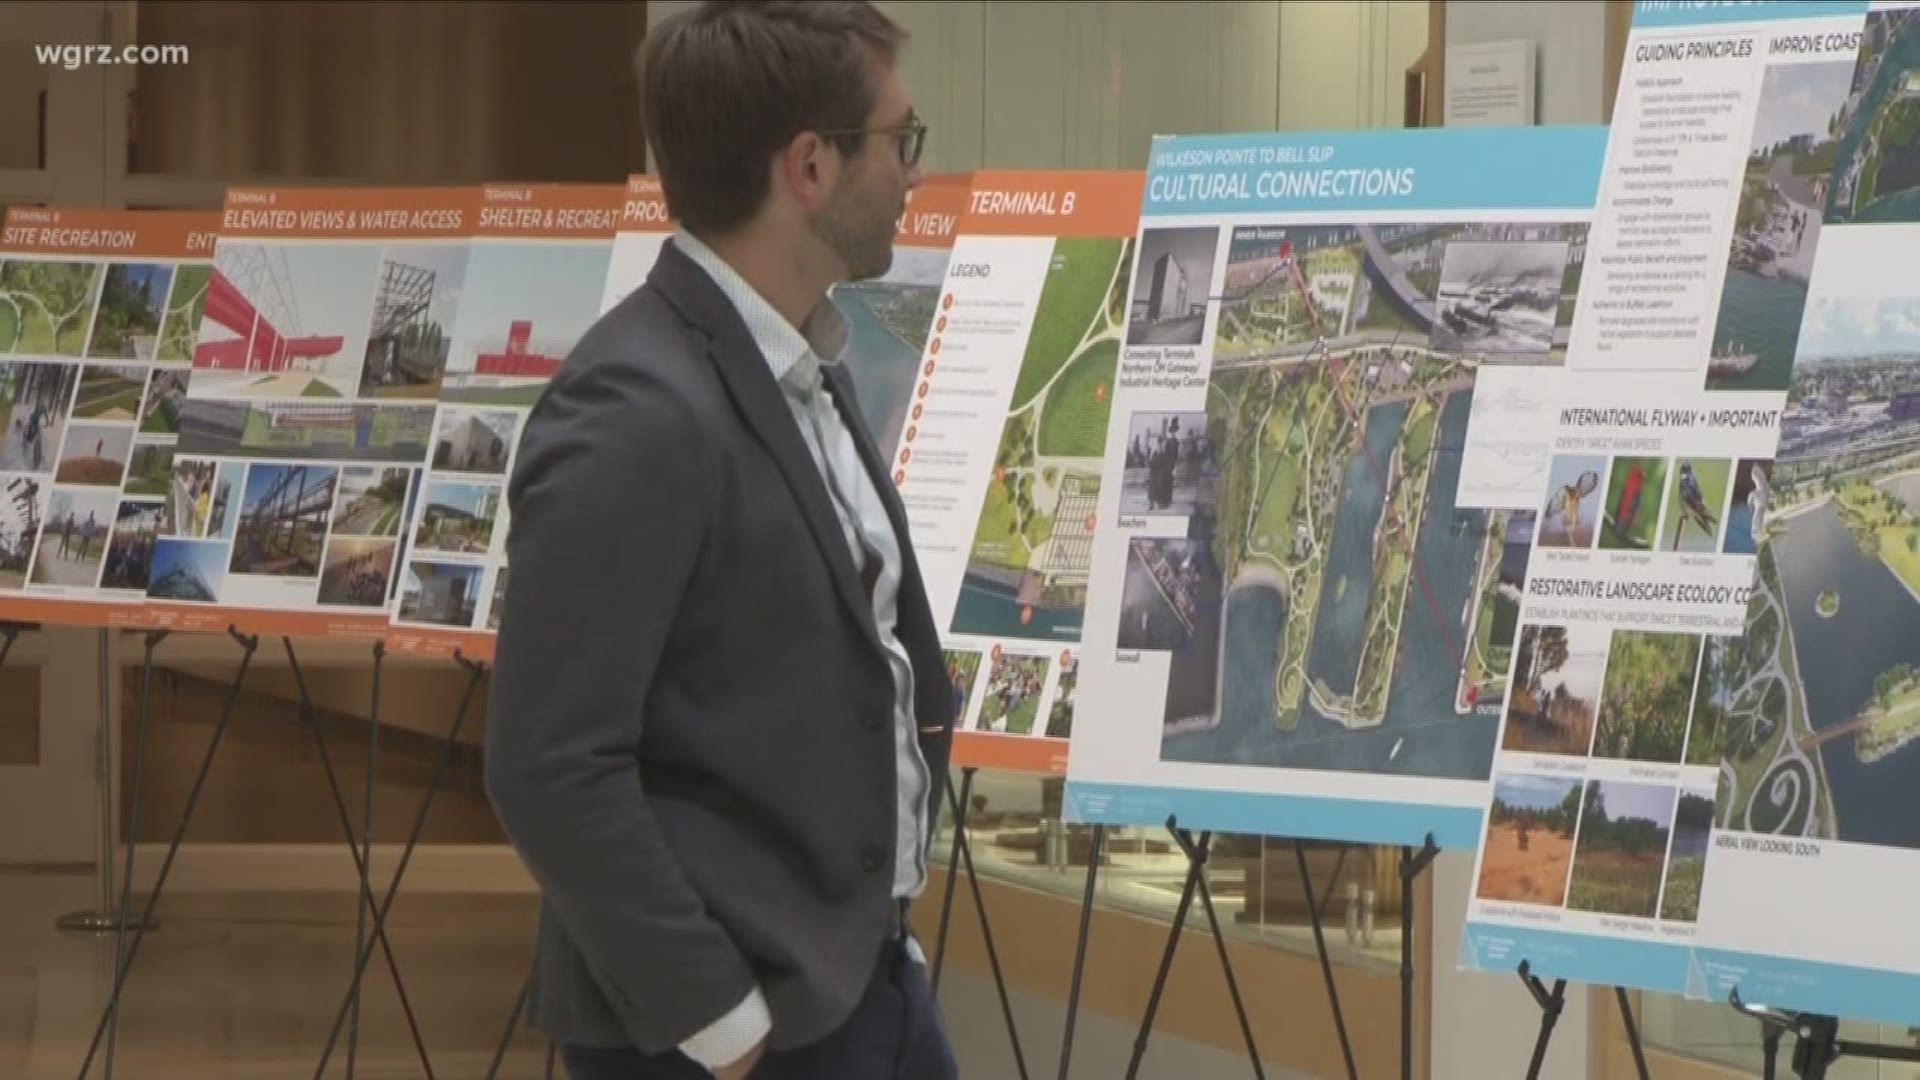 Plans to transform Buffalo's Outer Harbor